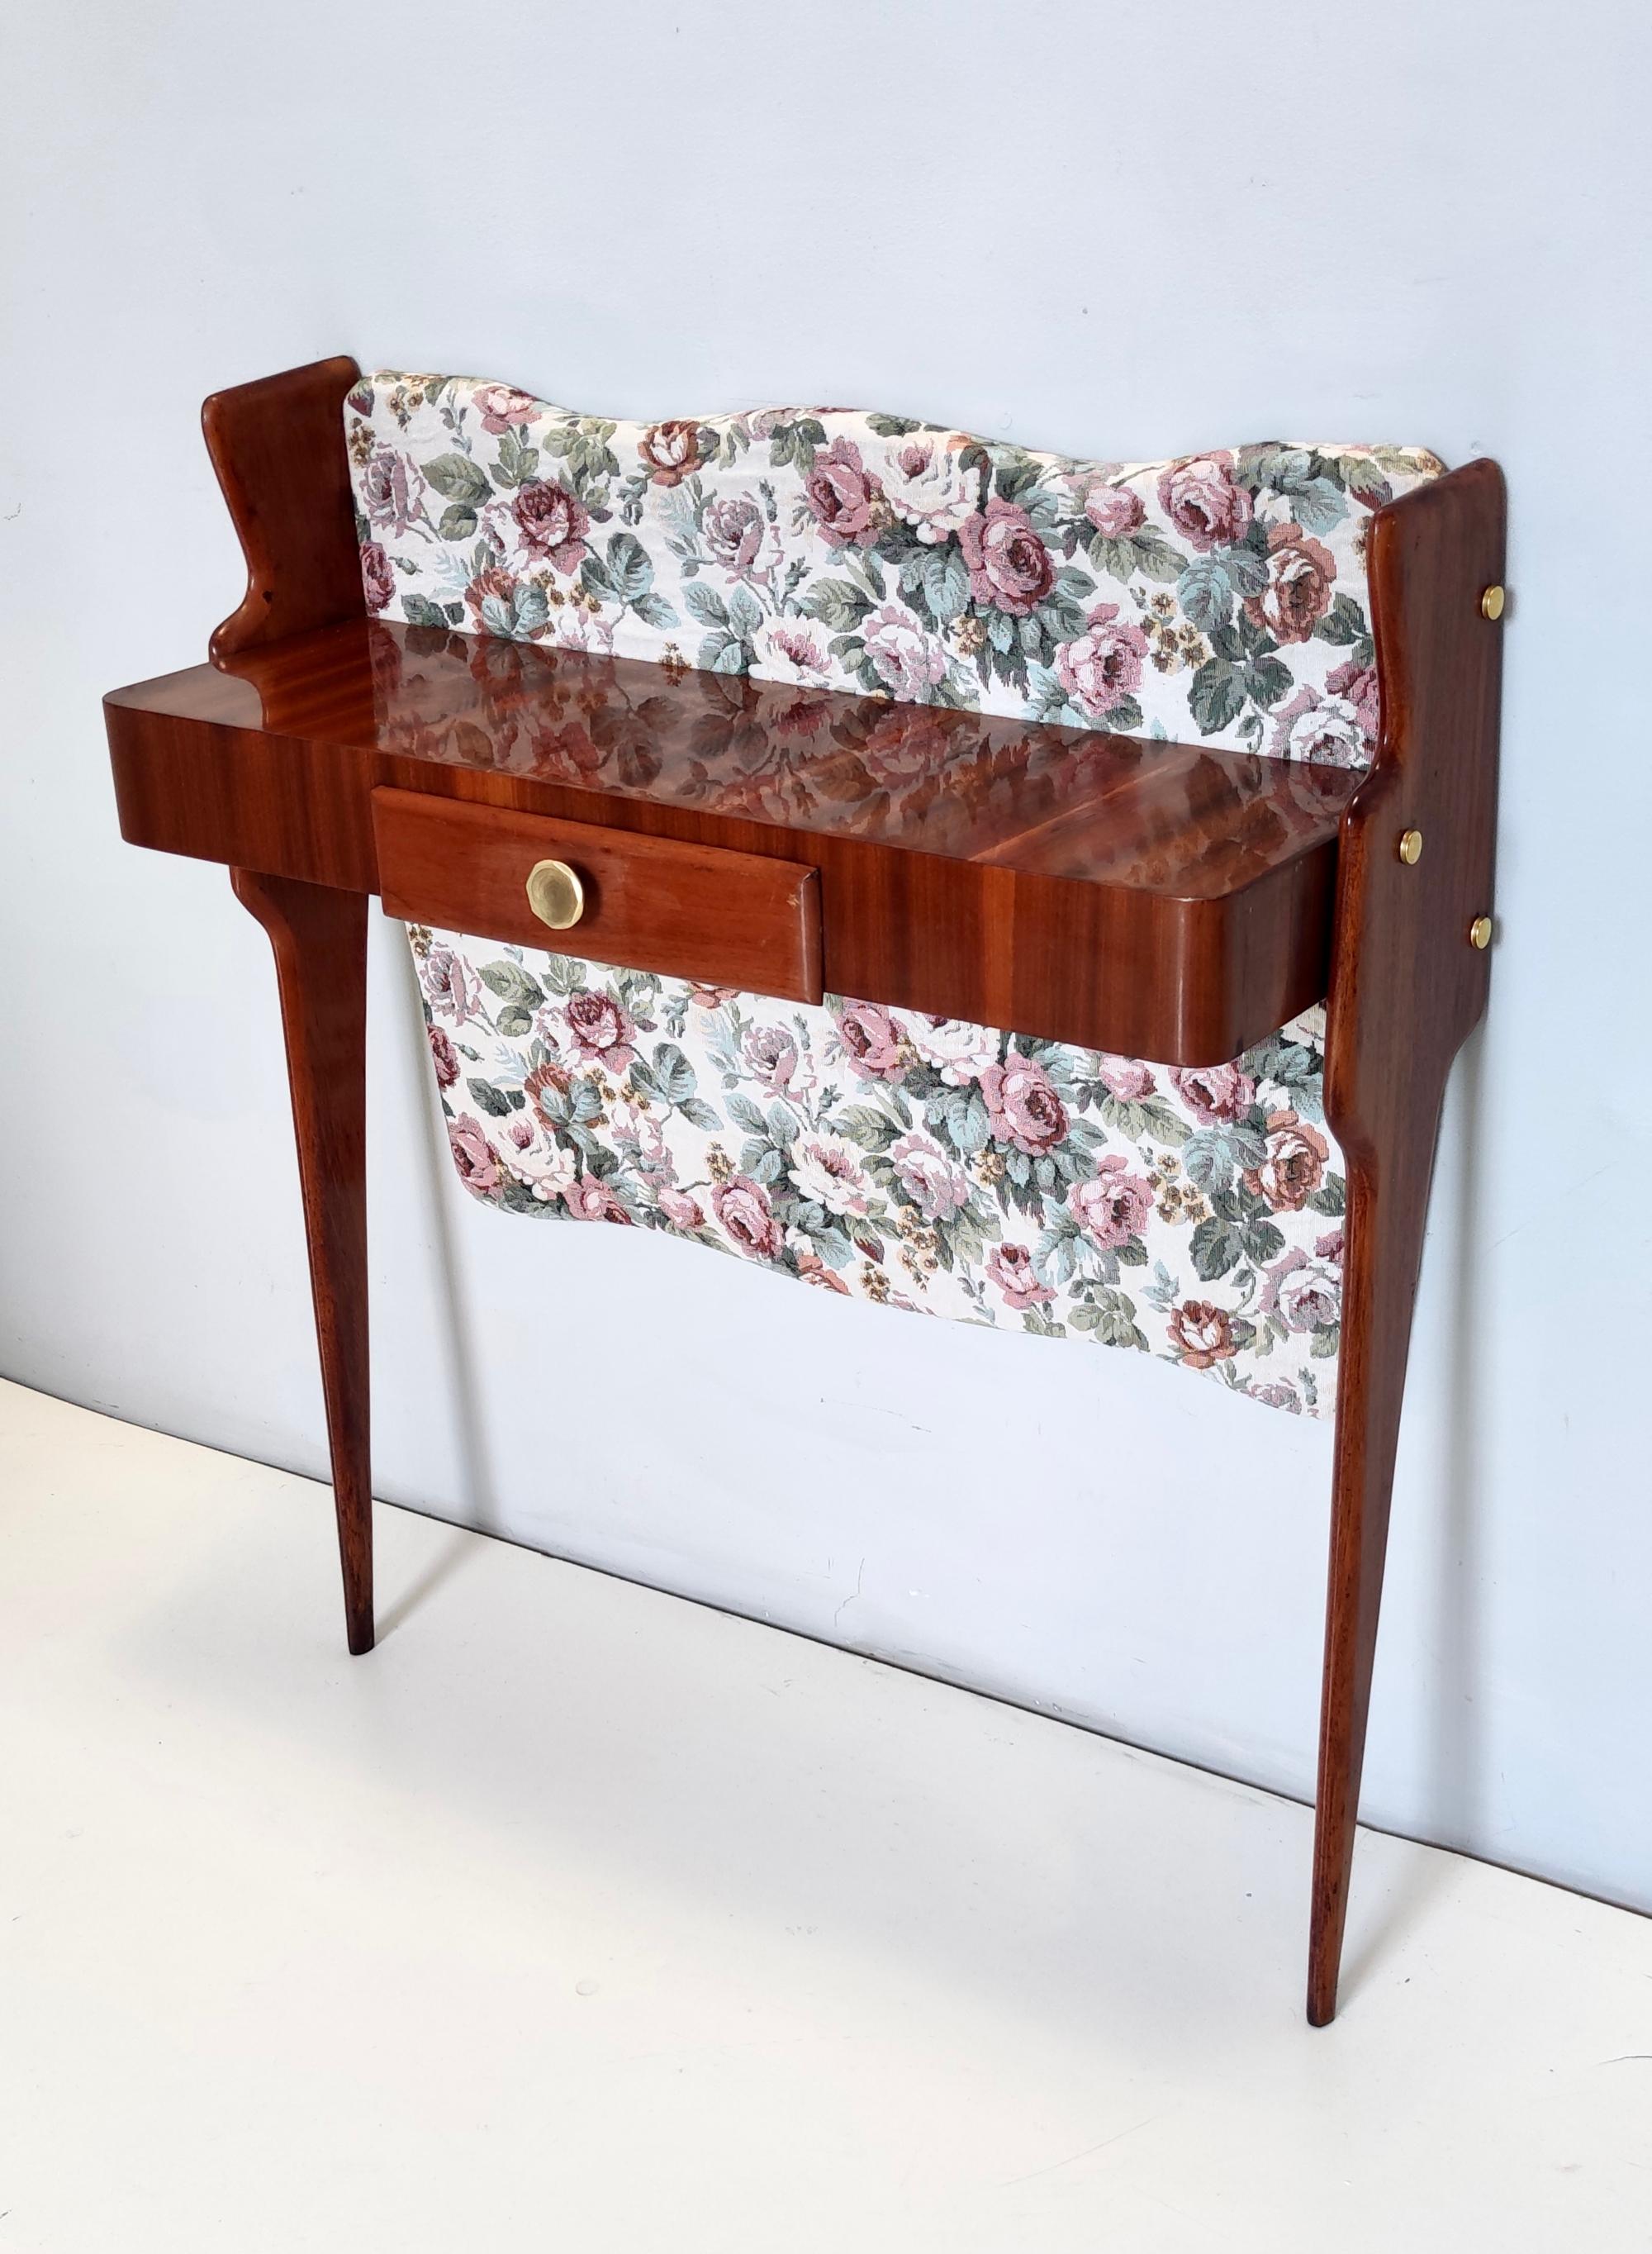 Vintage Ebonized Beech and Rose-Patterned Fabric Console with a Drawer, Italy In Excellent Condition For Sale In Bresso, Lombardy